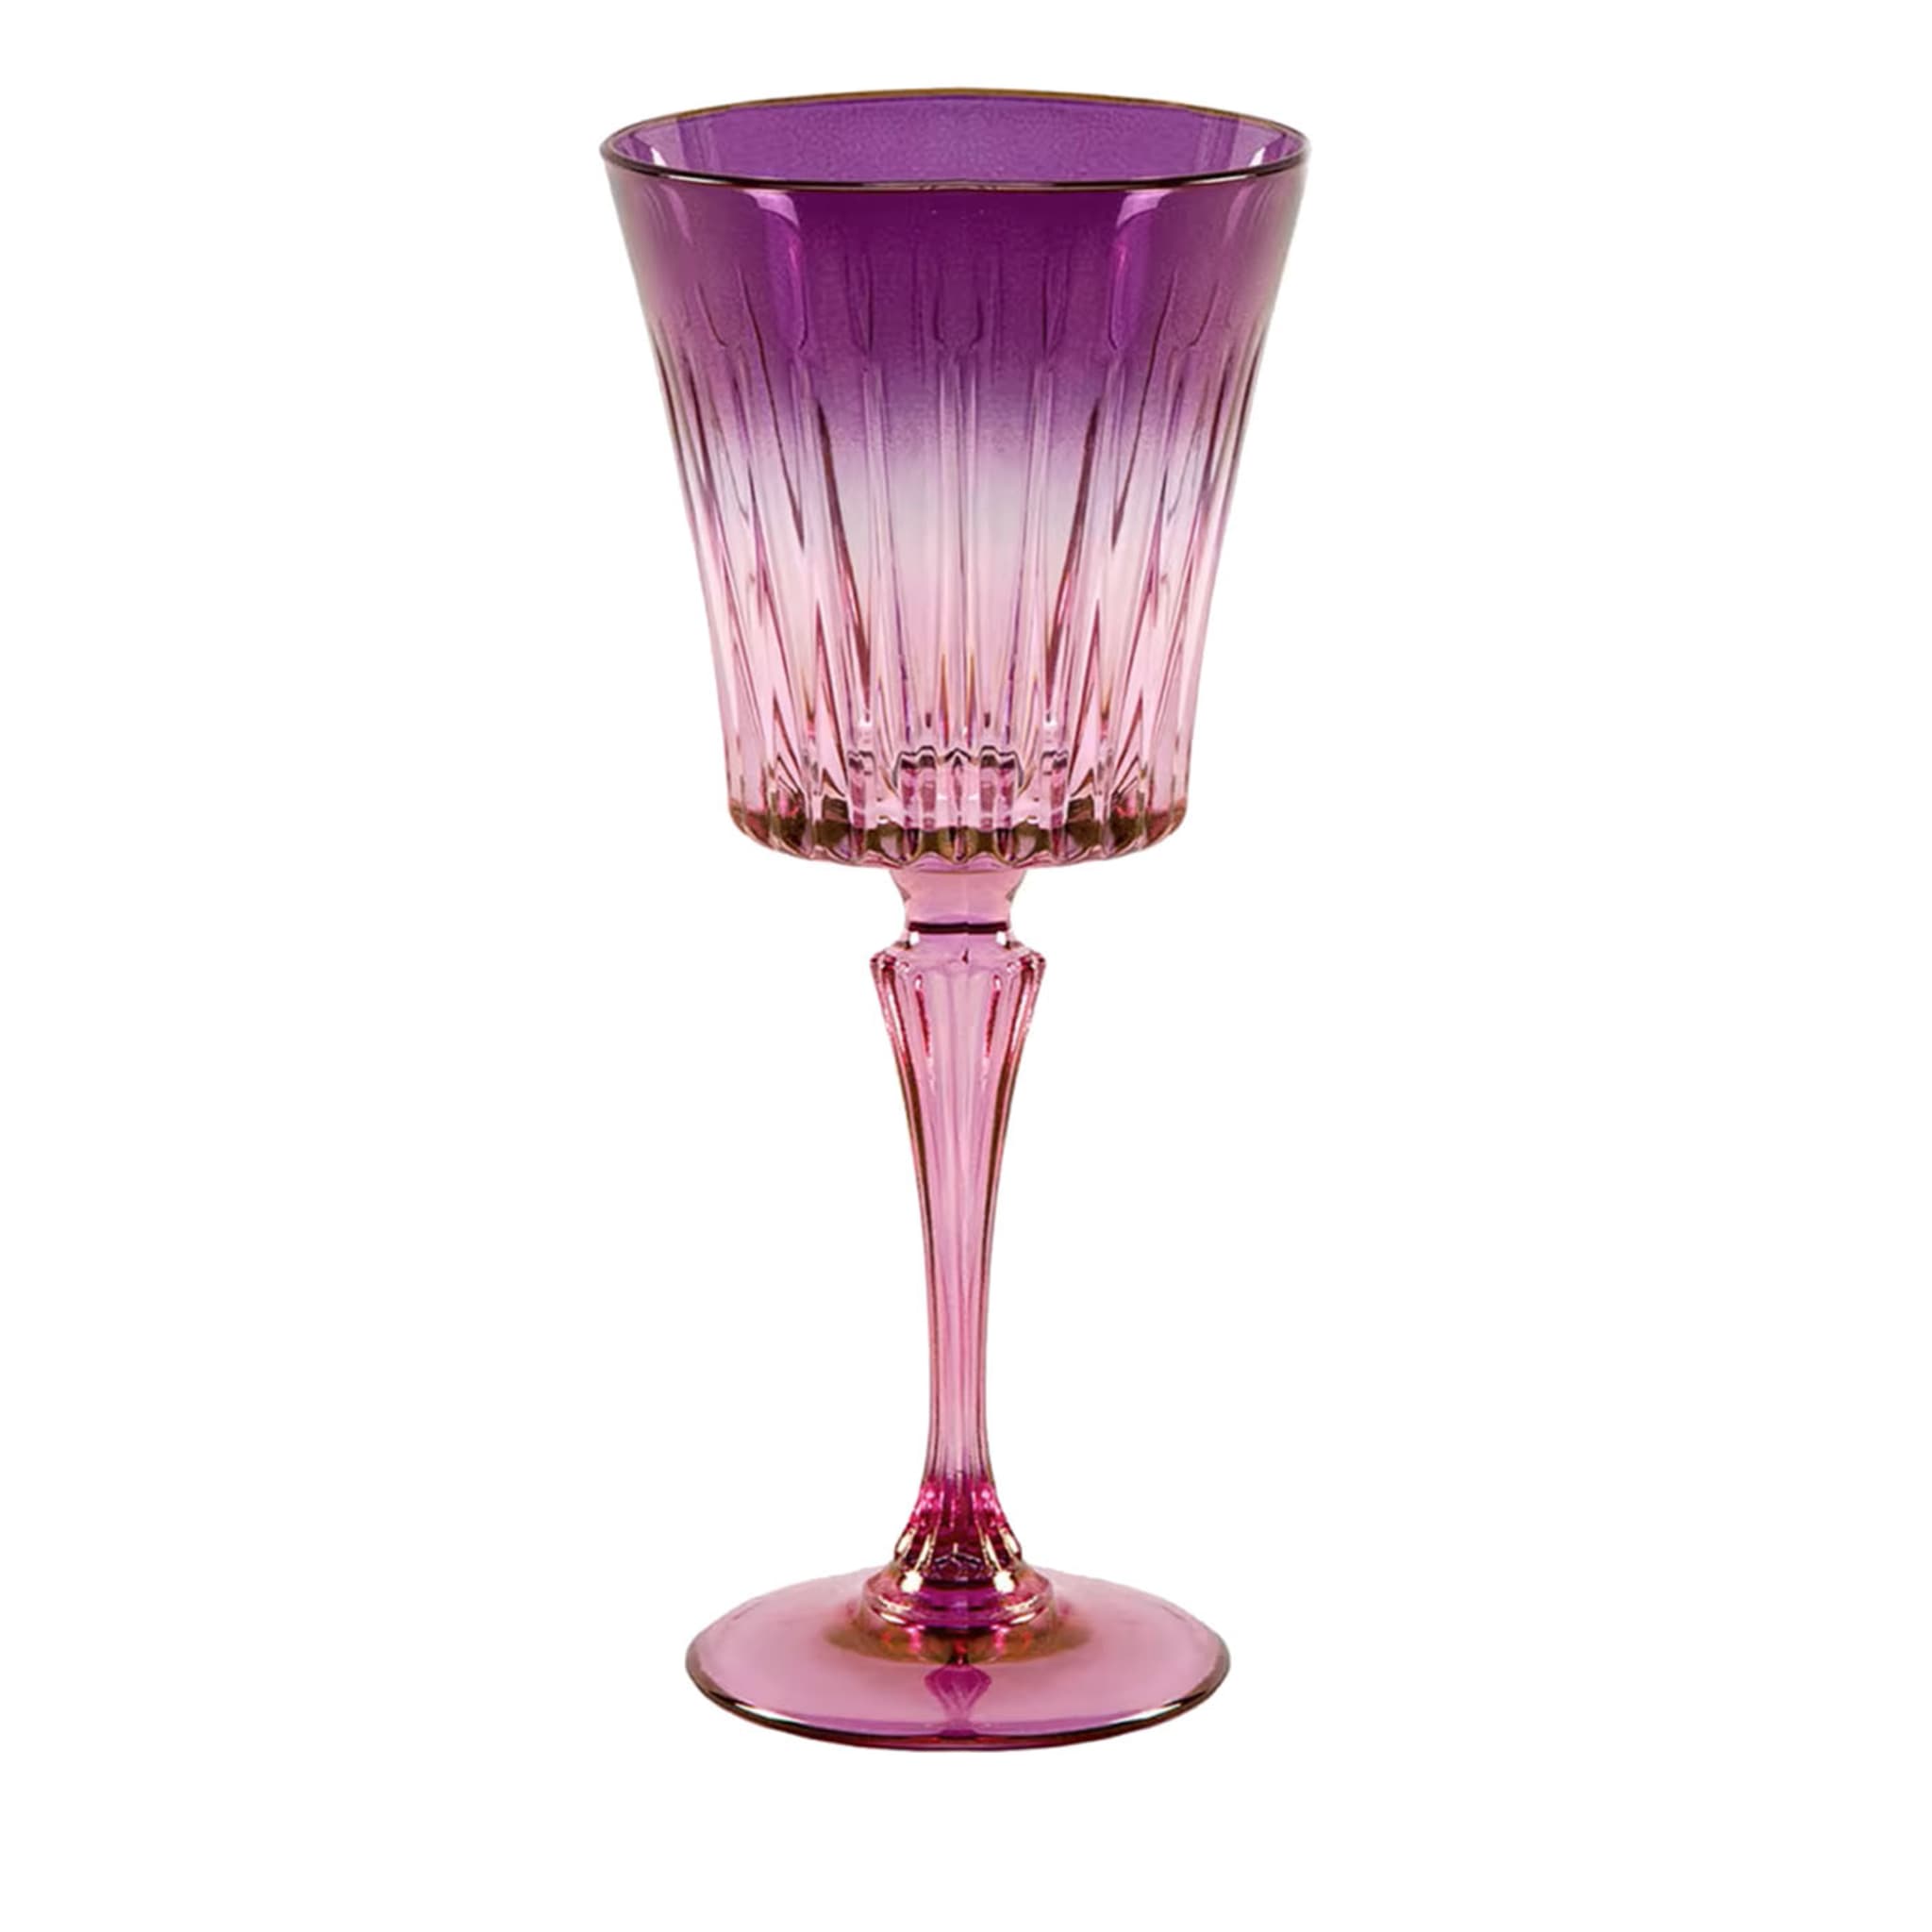 Domina Set of 2 Pink-To-Purple Water Glasses Luisa Beccaria